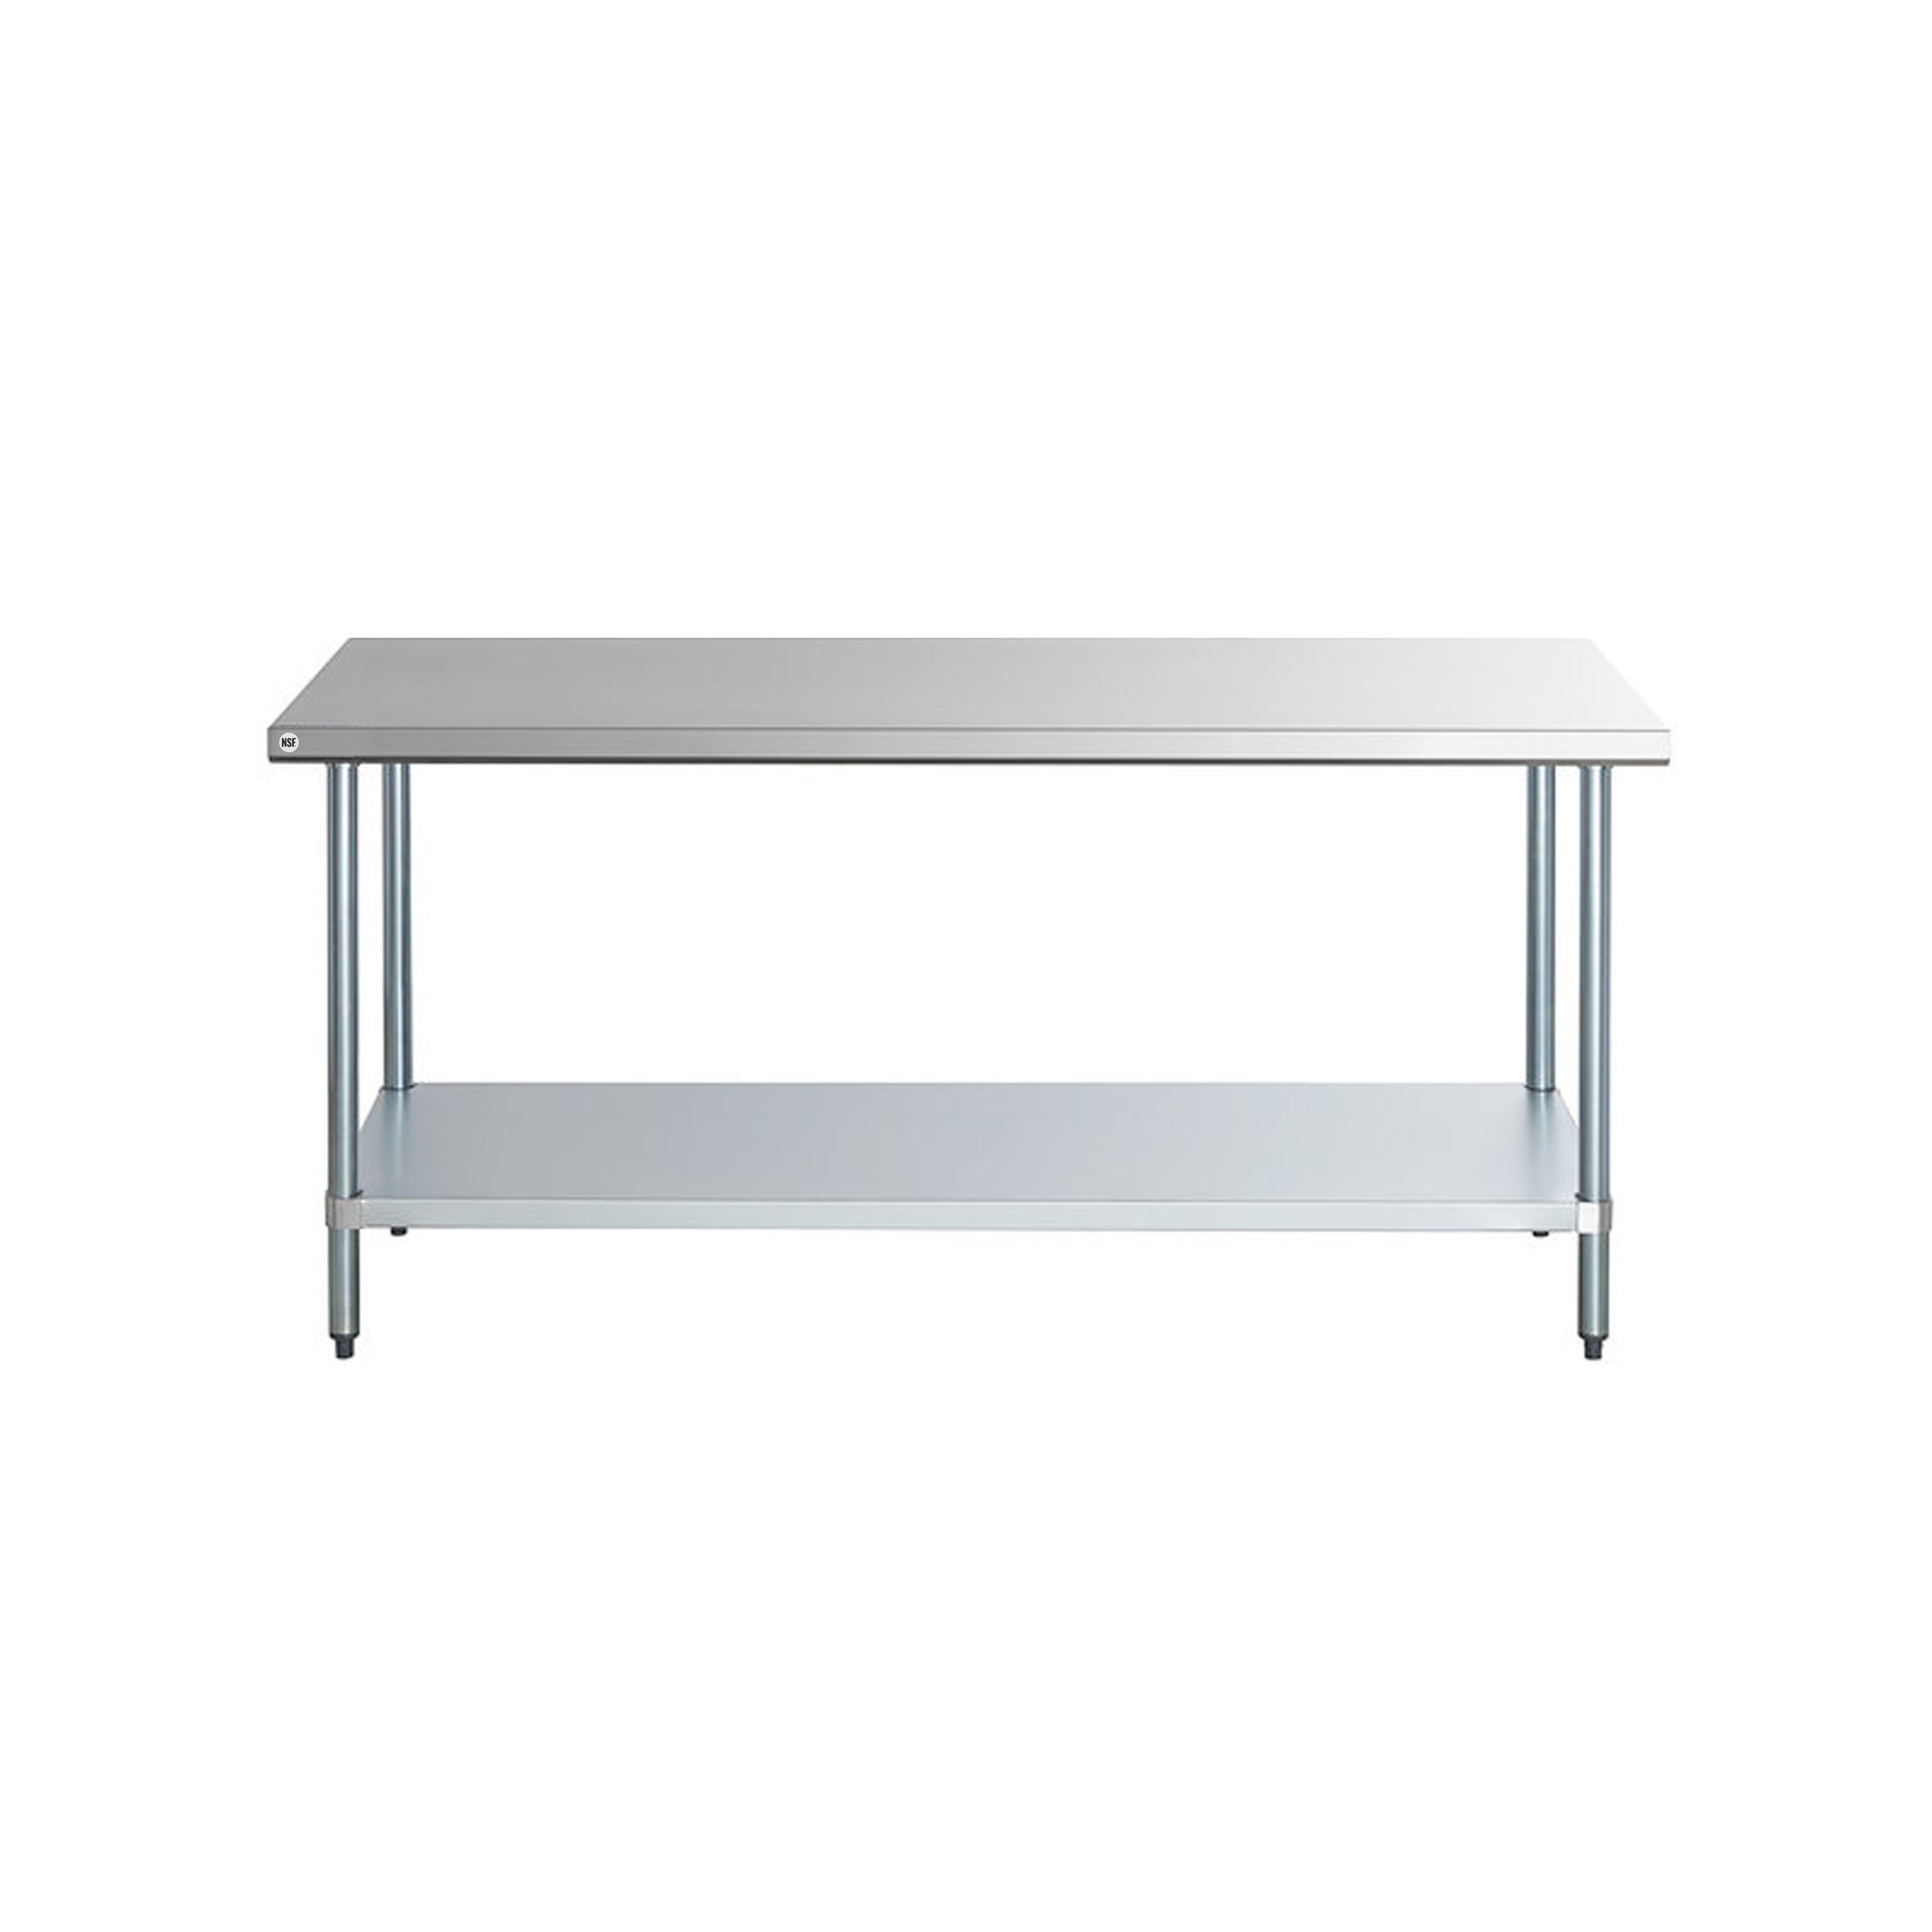 Omcan - 24196, Commercial 18" x 24" Stainless Steel Kitchen Work Table 390lbs Light Duty